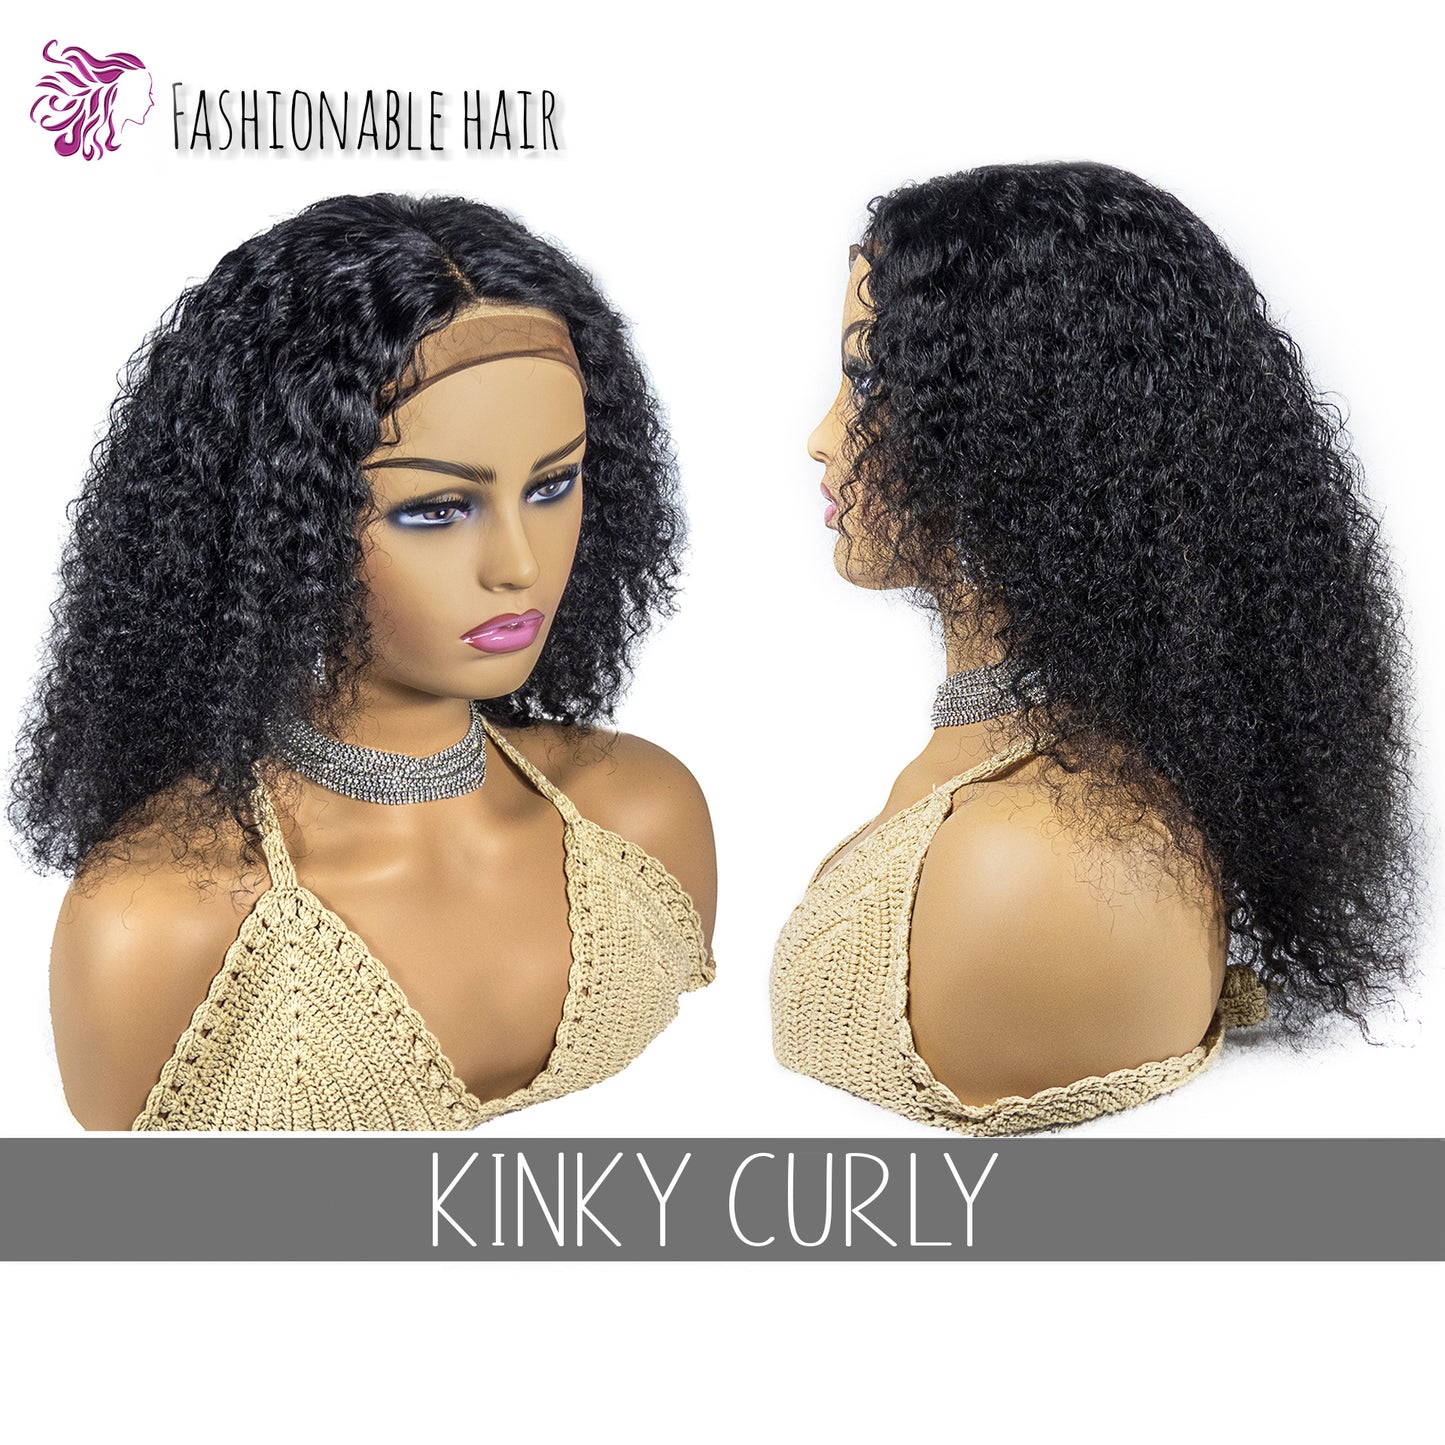 Perruque kinky curly cheveux 100%humain qualité remy